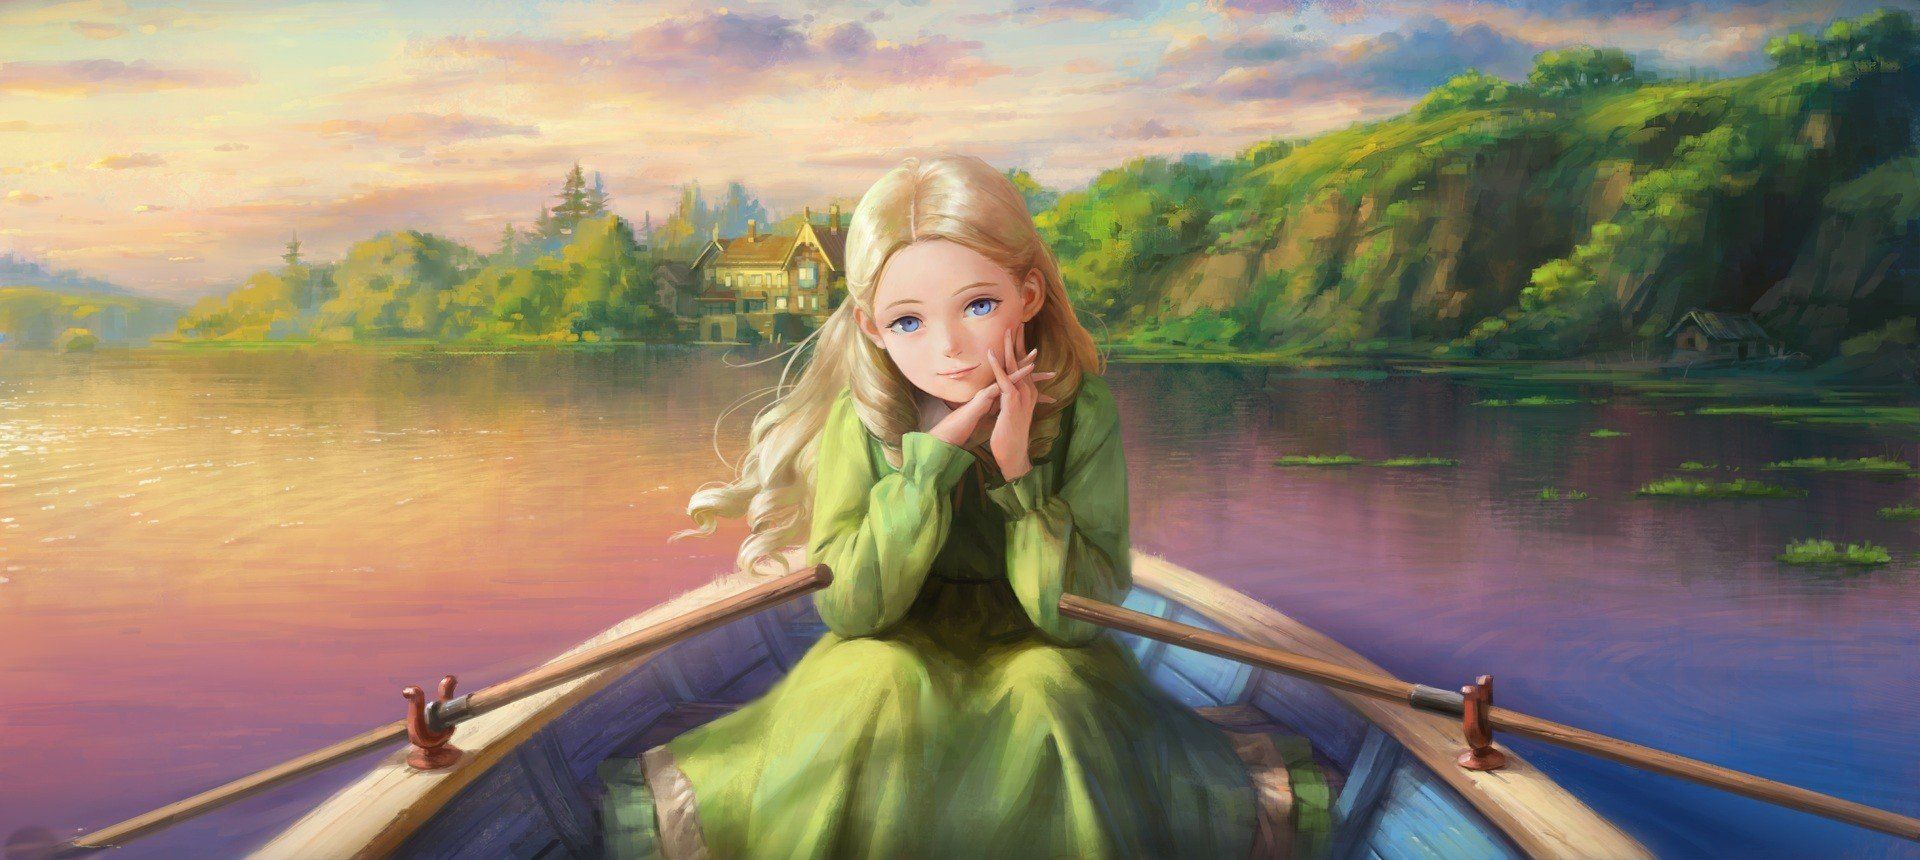 blue eyes, Boat, Original characters, Dress, When Marnie Was There